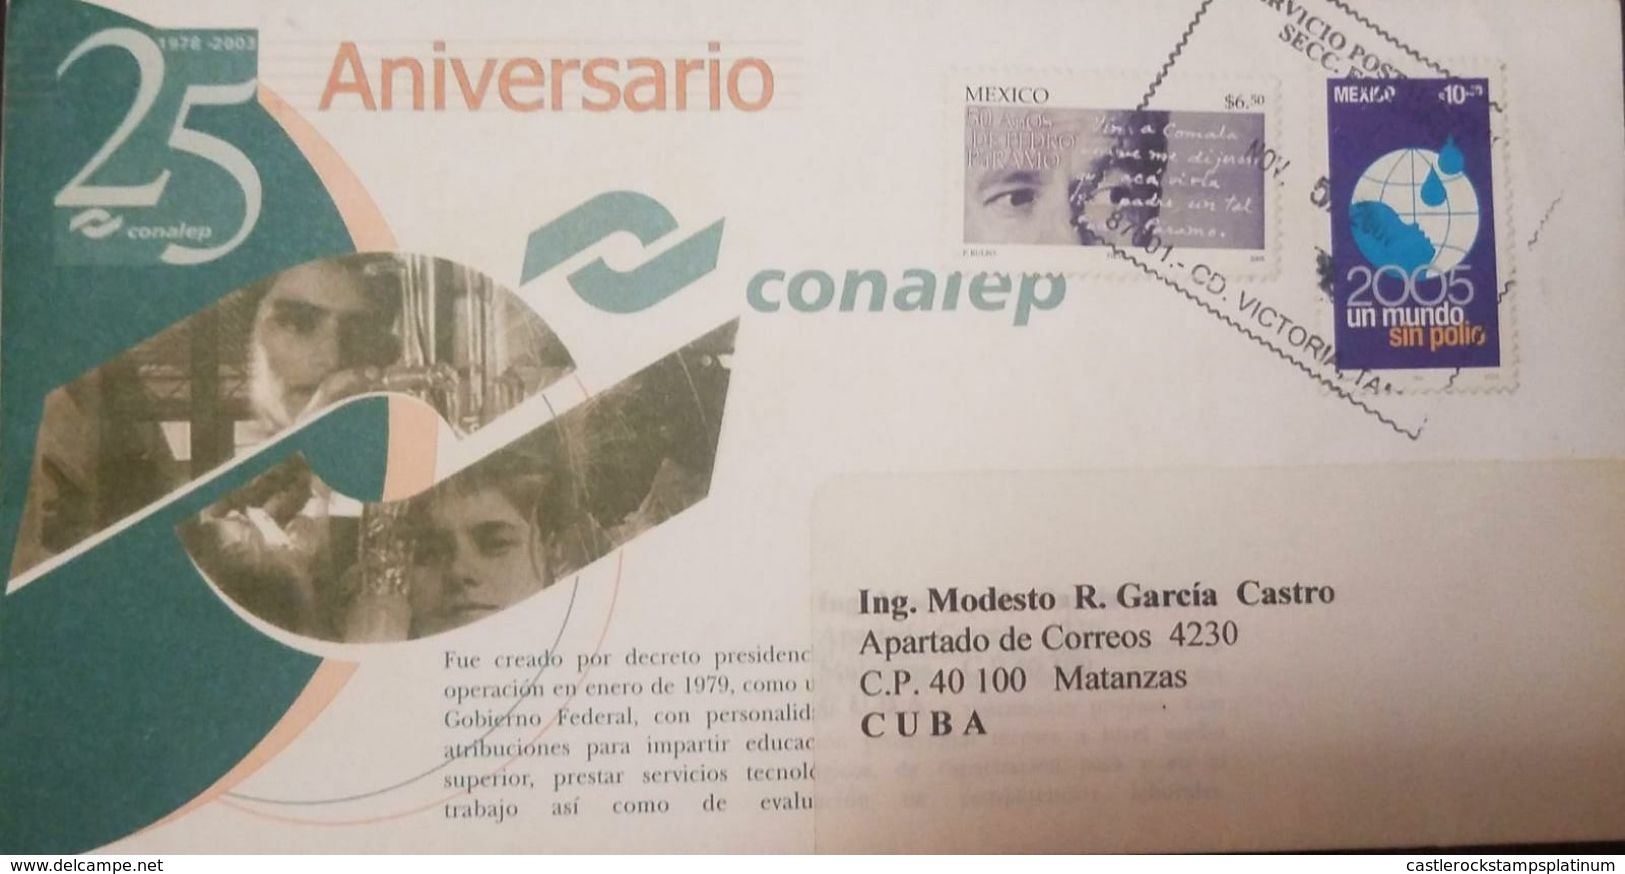 L) 2004 MEXICO, 50 YEAR PEDRO PANAMA, 2005 A WORLD WITHOUT POLIO, 25 YEARS CONALEP, CIRCULATED COVER FROM MEXICO TO CARI - Mexico